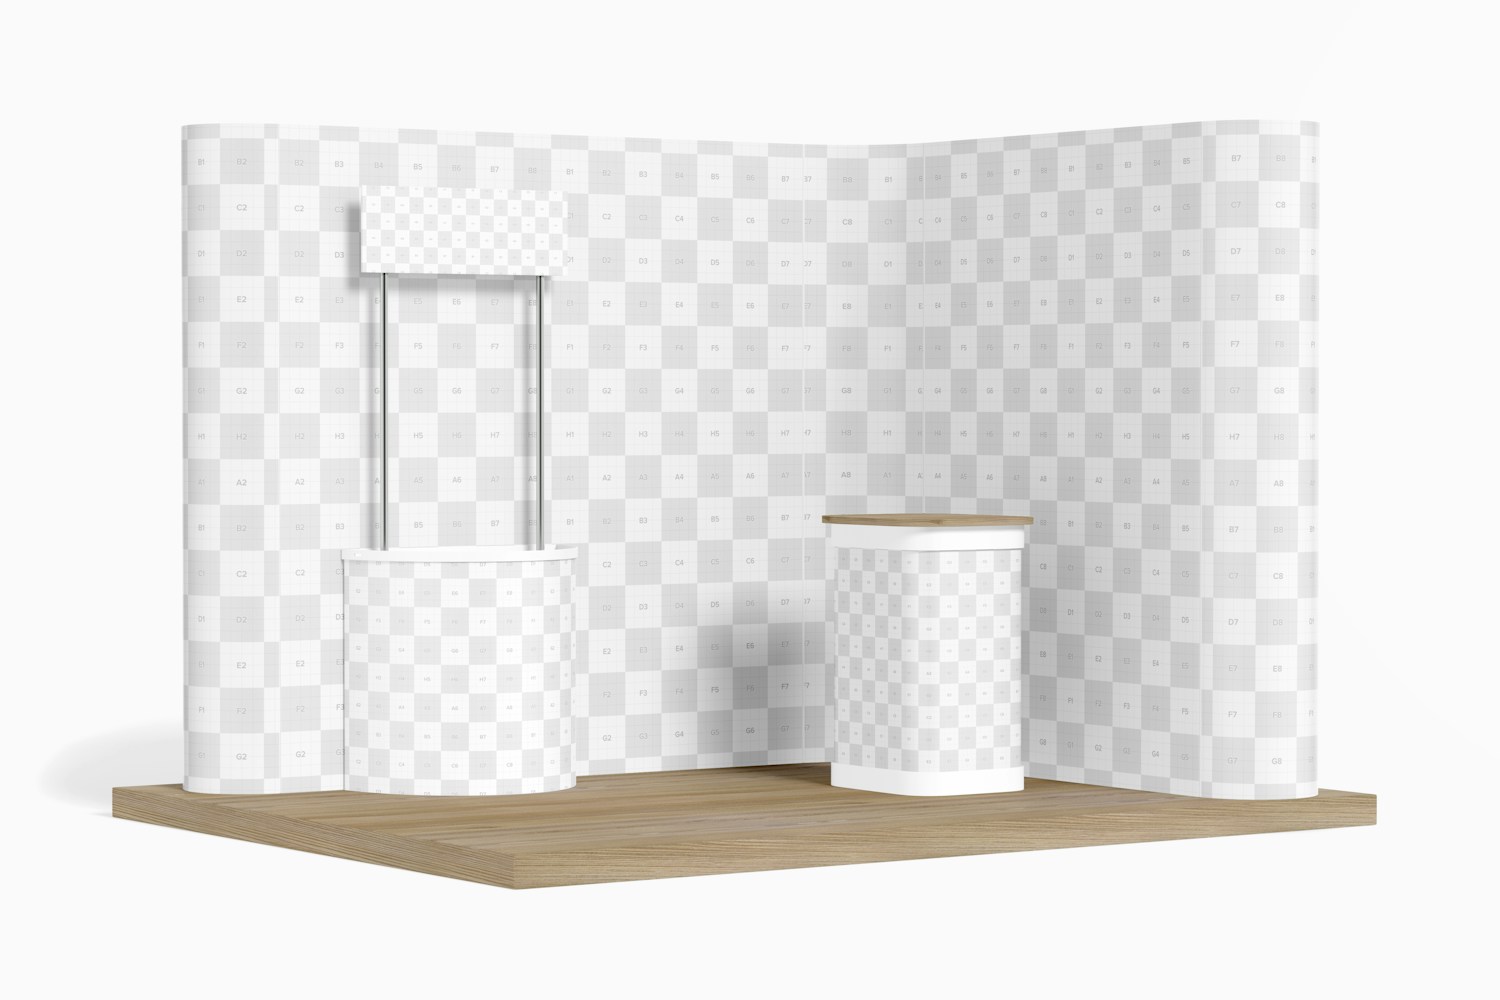 L Shaped Pop Up System with Stands Mockup